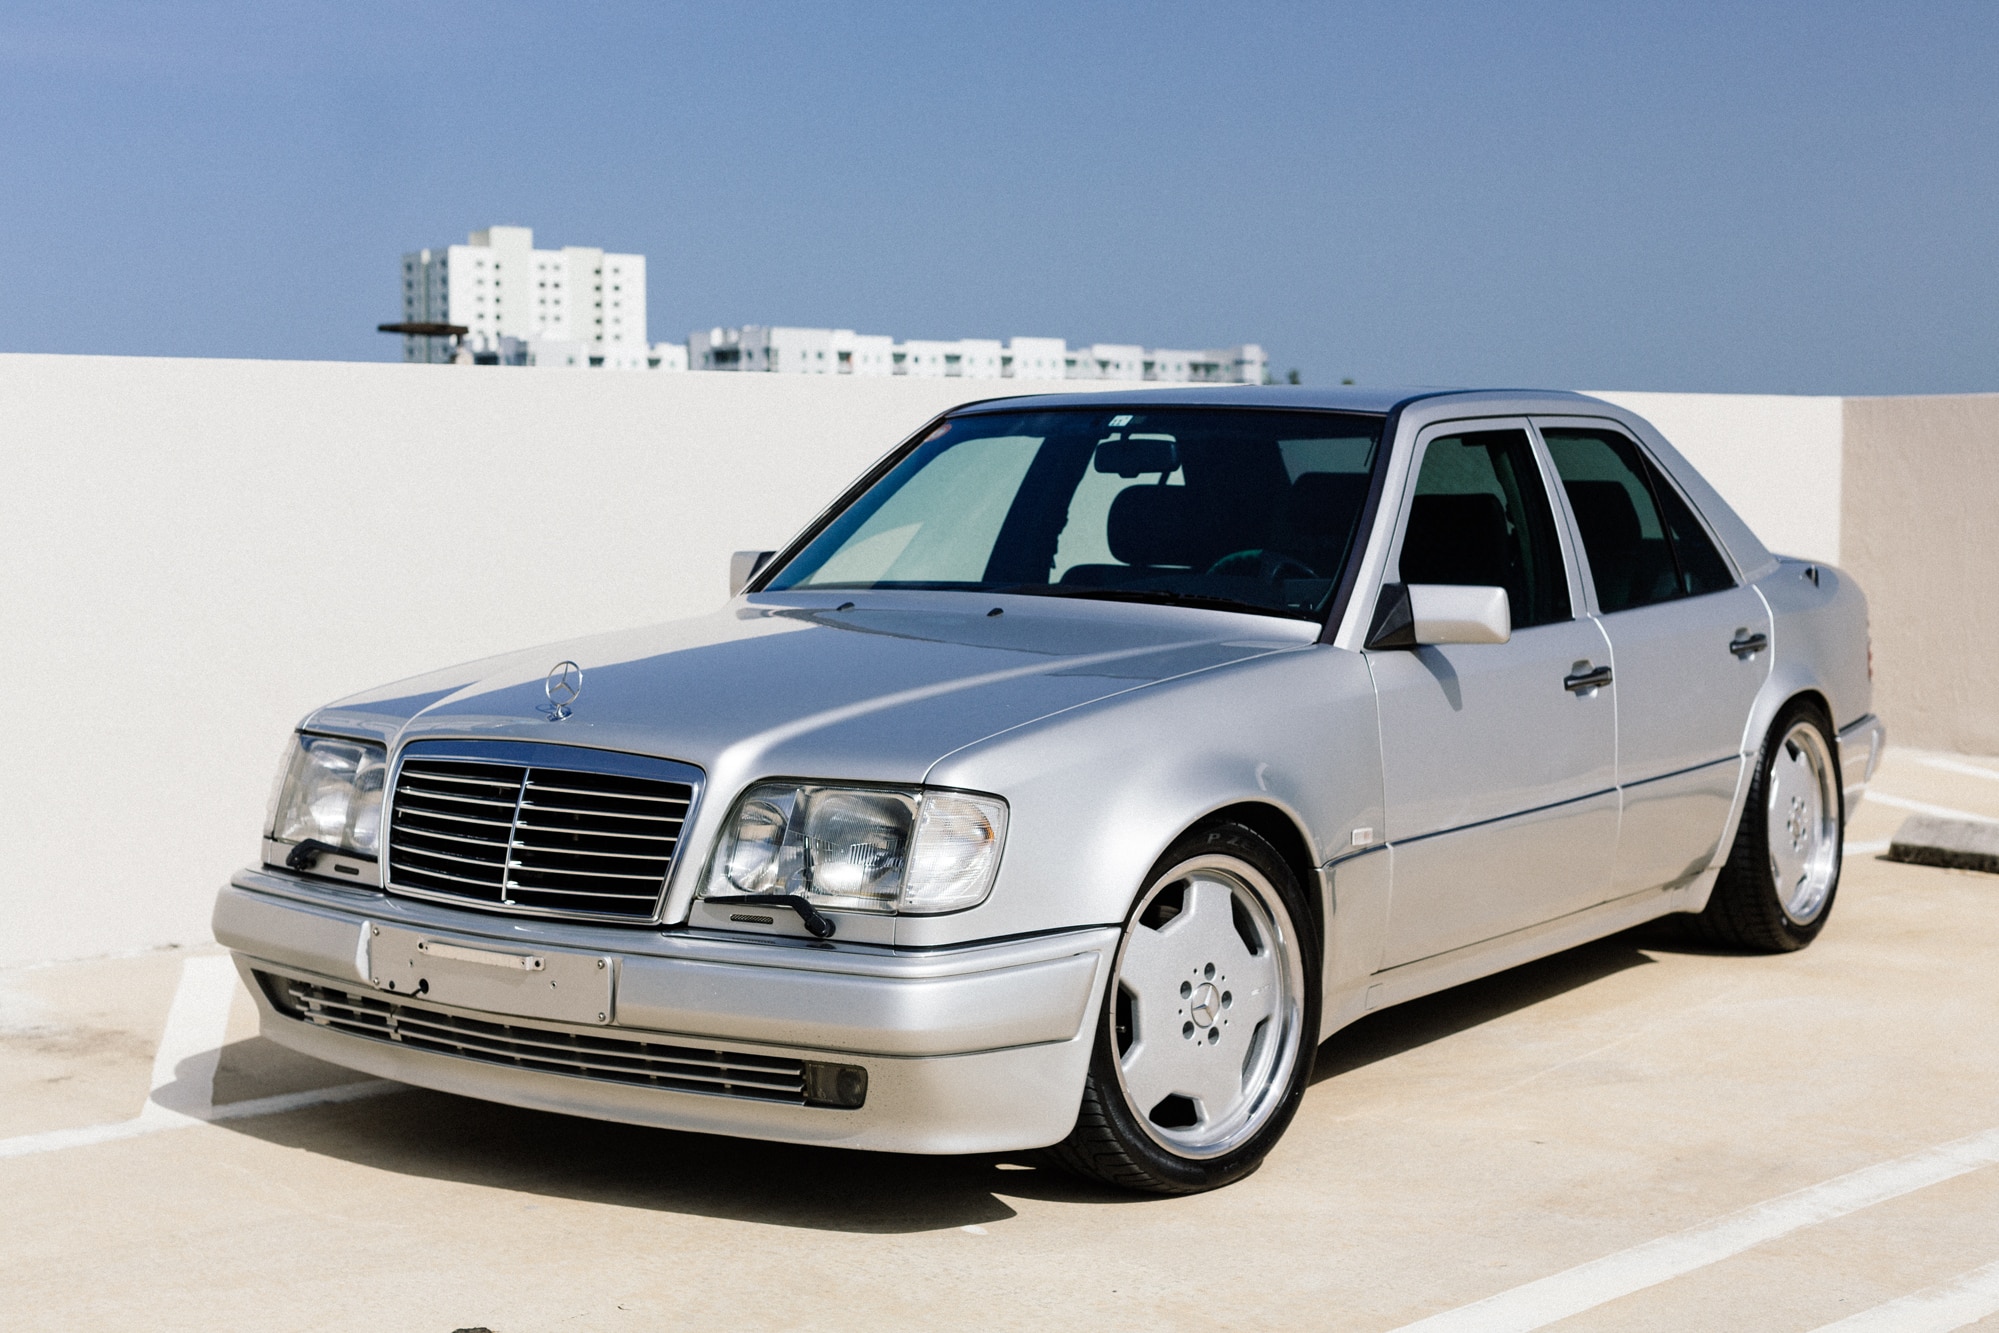 1994 Mercedes-Benz E 500 Limited (W124) | Brilliant Silver/Black-Green | 1 of 951 | J’s Auto Exhaust | Service History | Amazing Condition | Extremely Rare